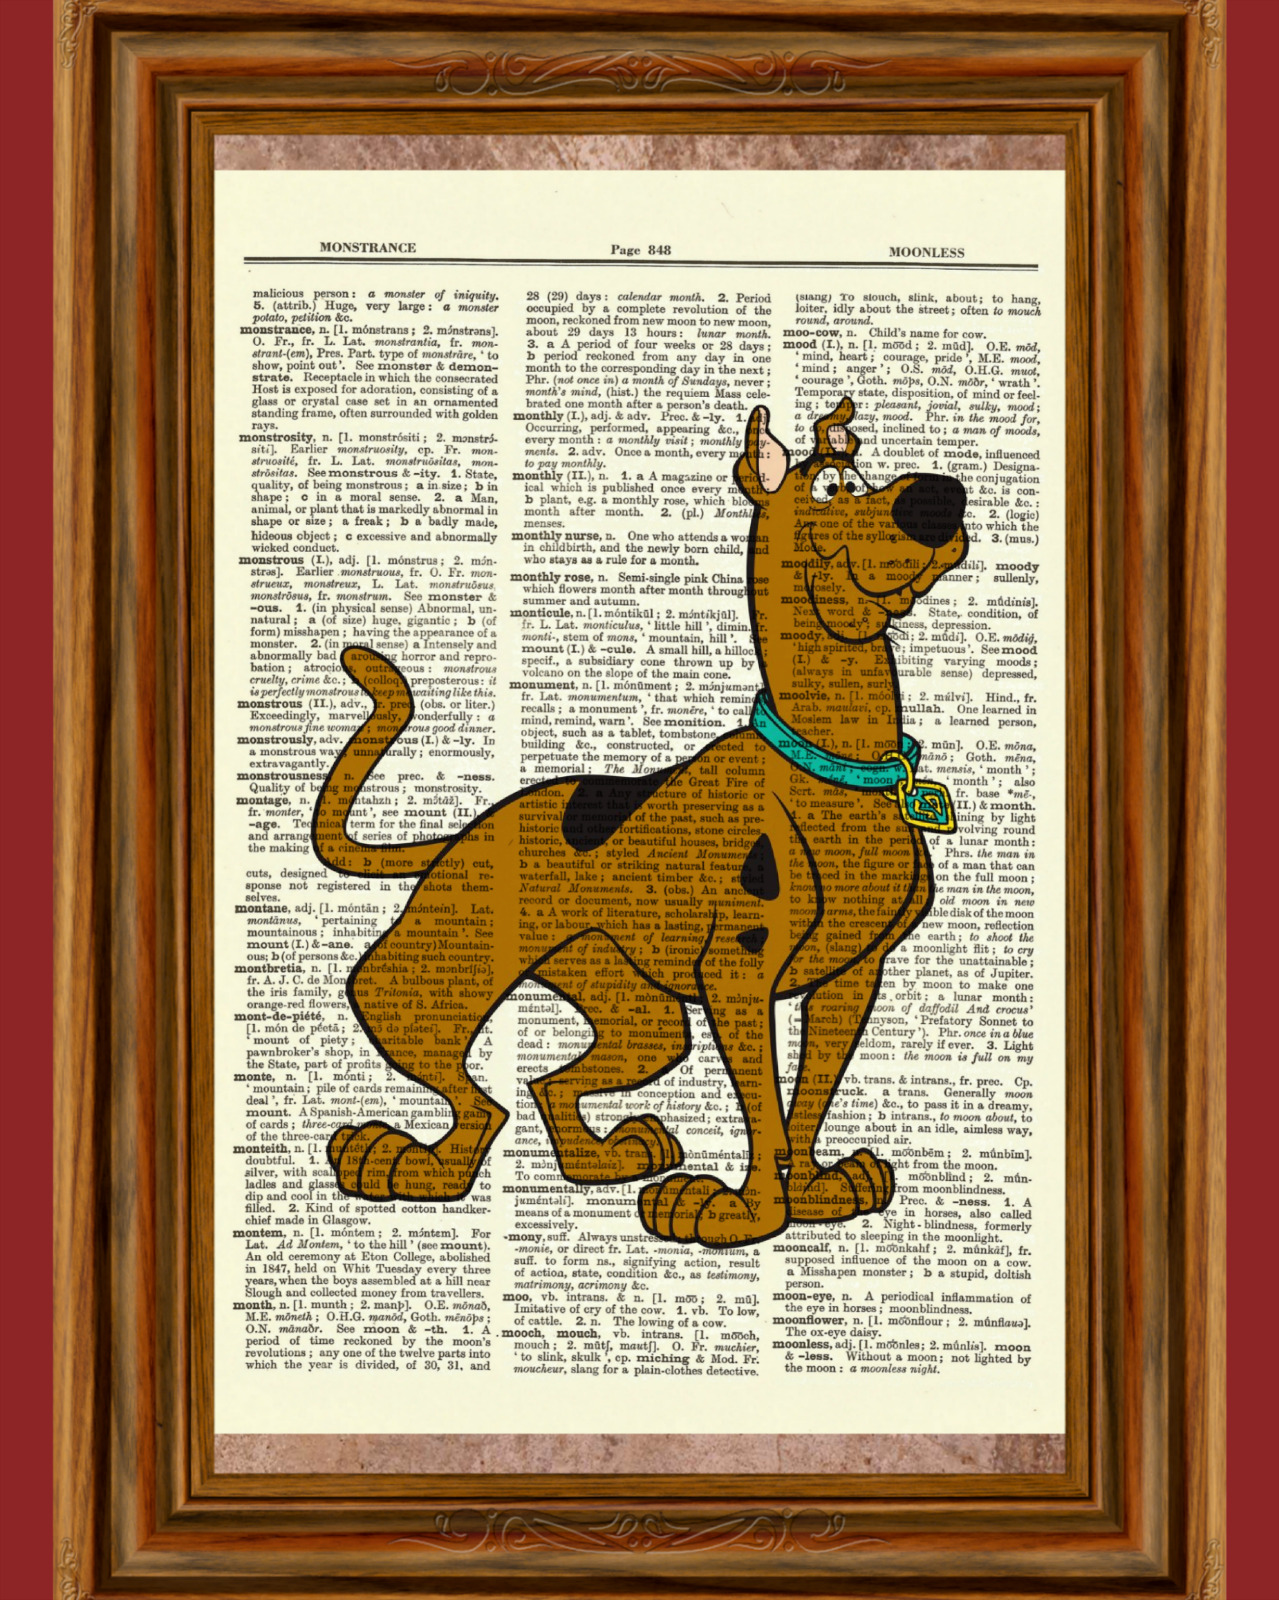 Scooby Doo Vintage Dictionary Art Print Poster Shaggy Collectible Cartoon